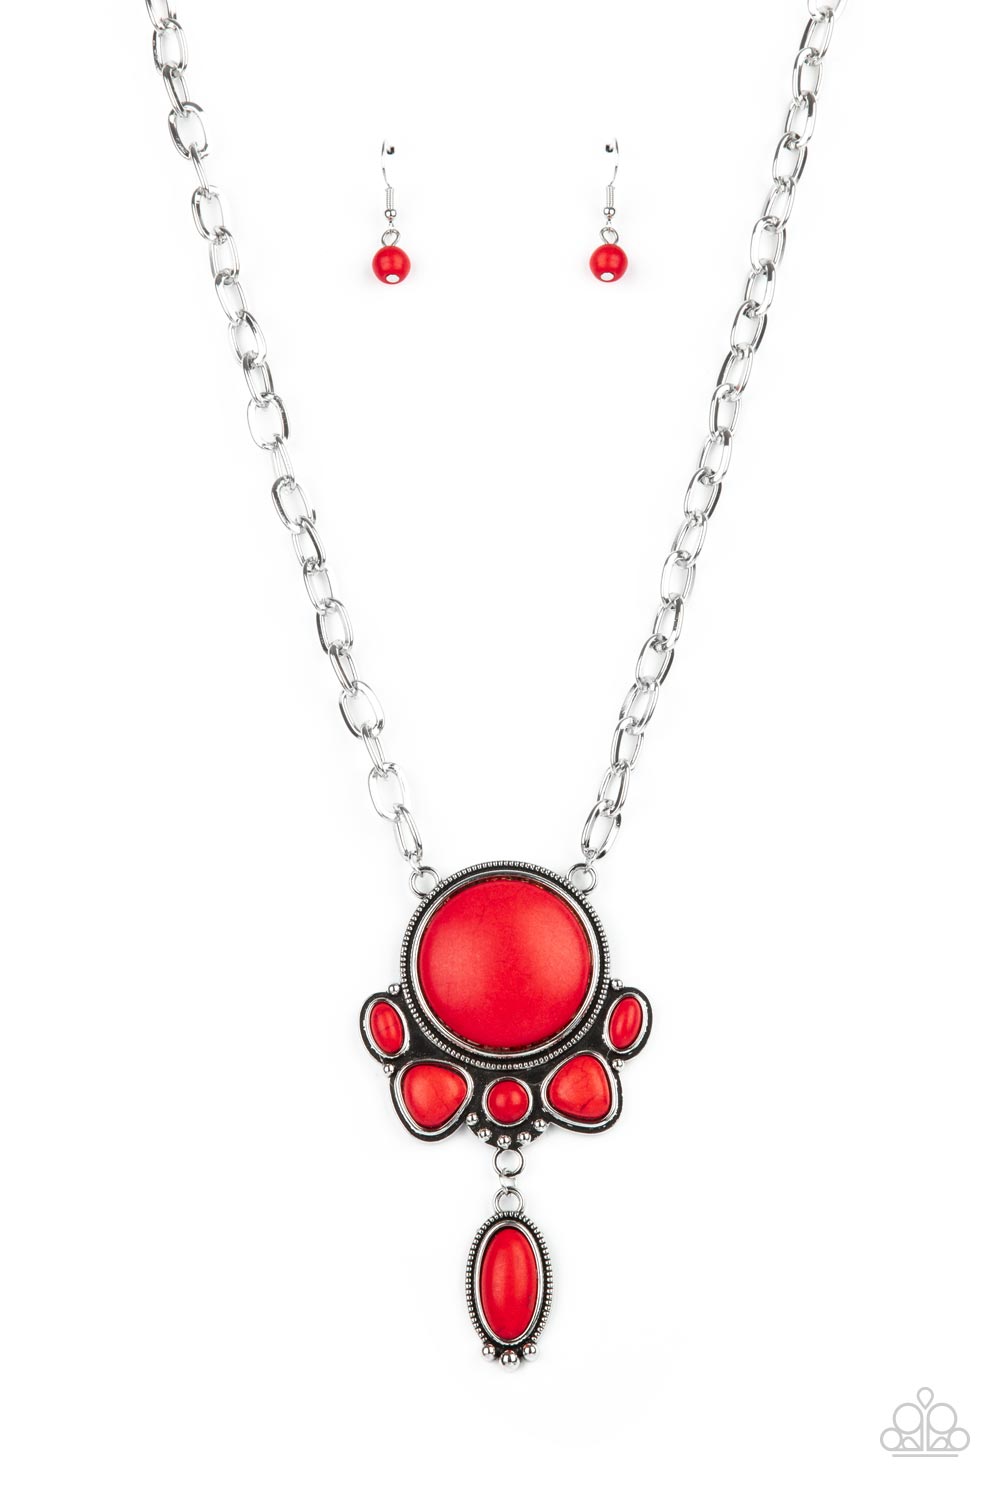 Paparazzi Accessories - Galatic Wonder - Red Rhinestone Necklaces – Lady T  Accessories